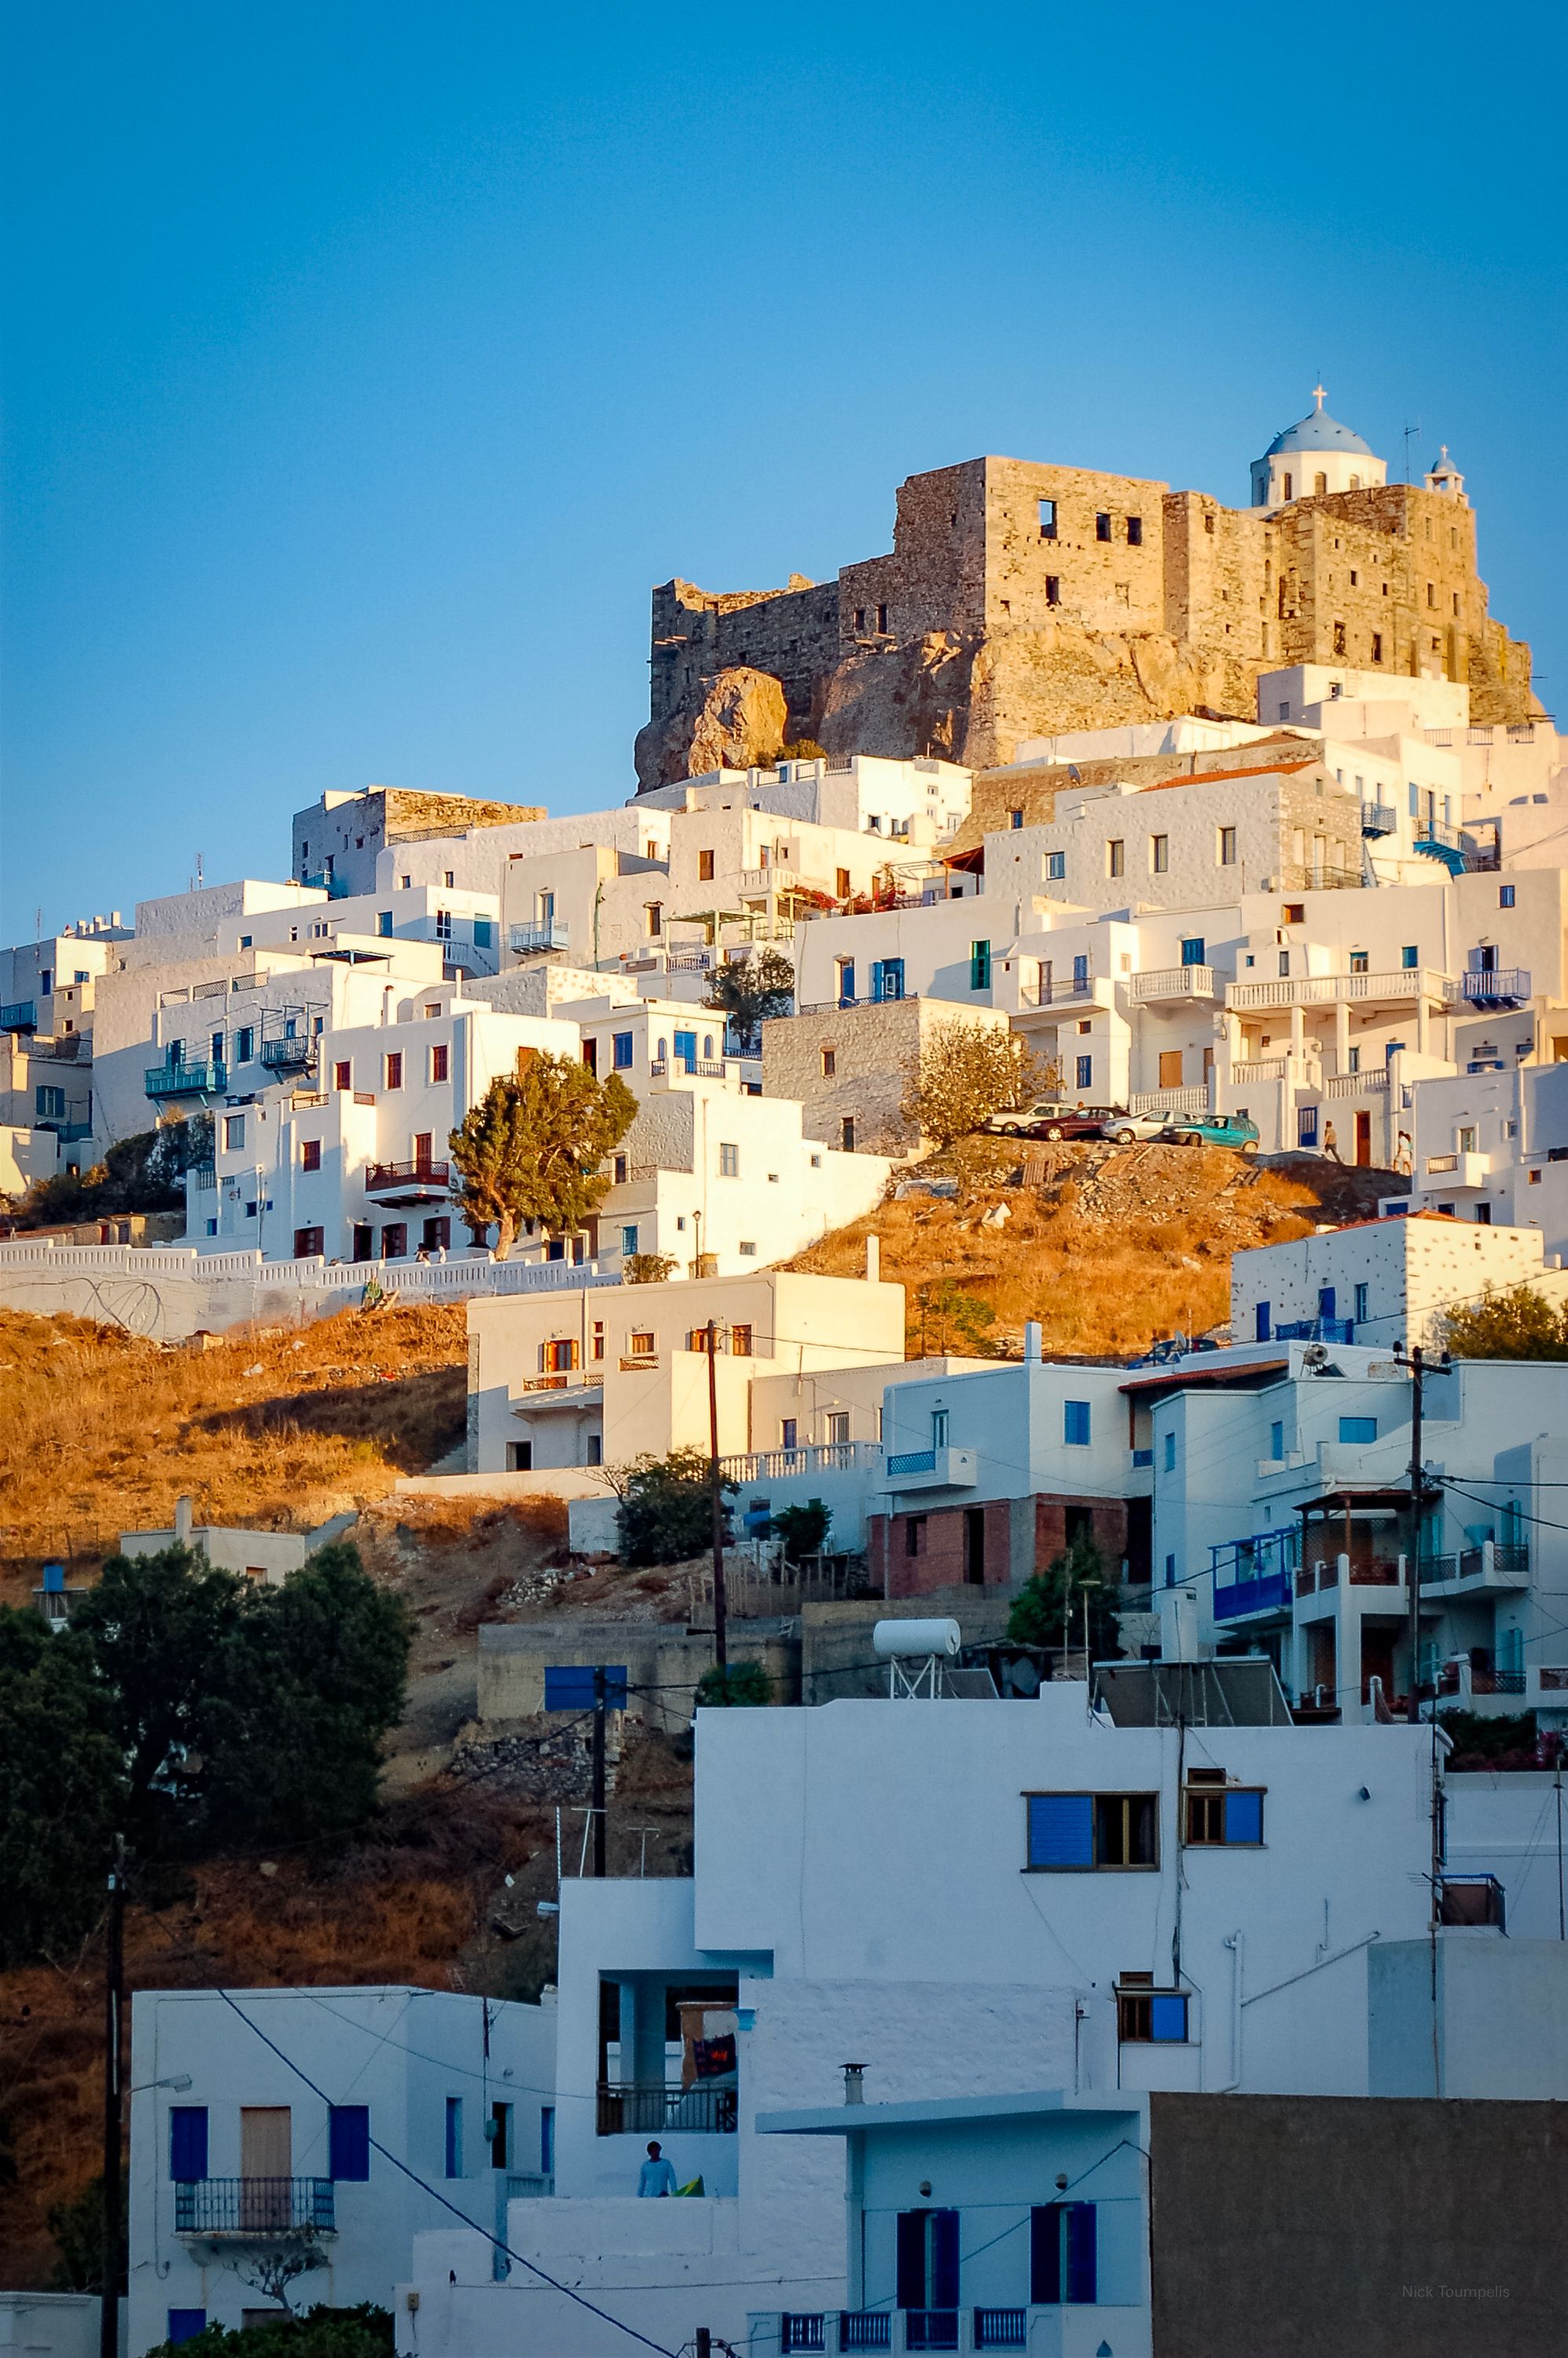 Astypalaia, with its castle